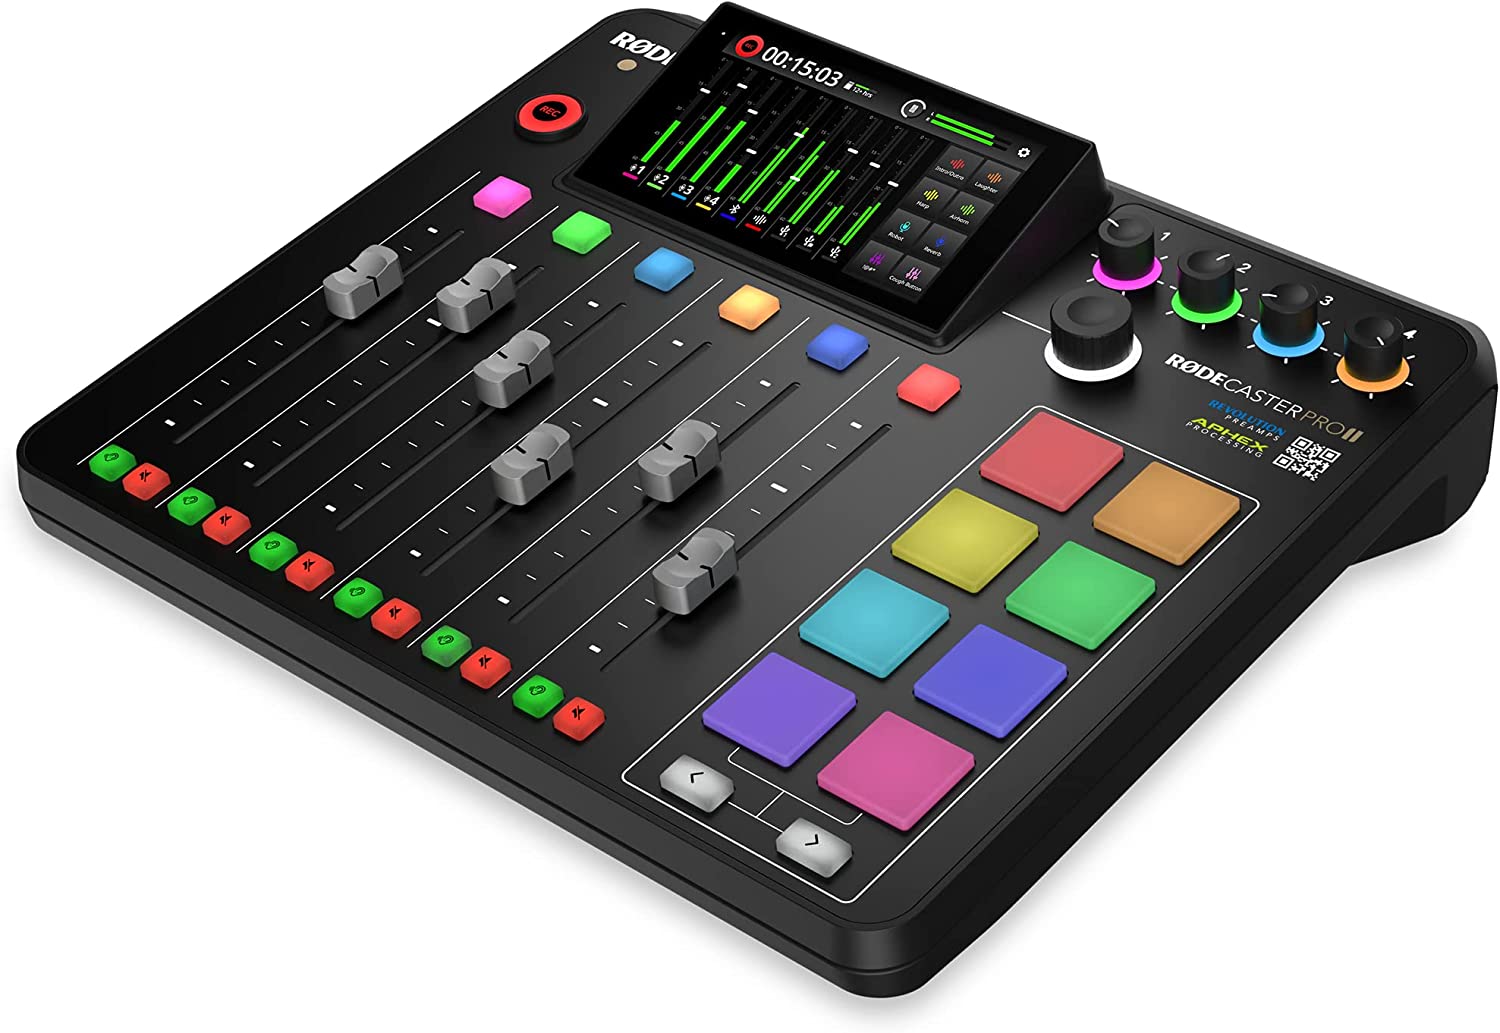 rodecaster pro